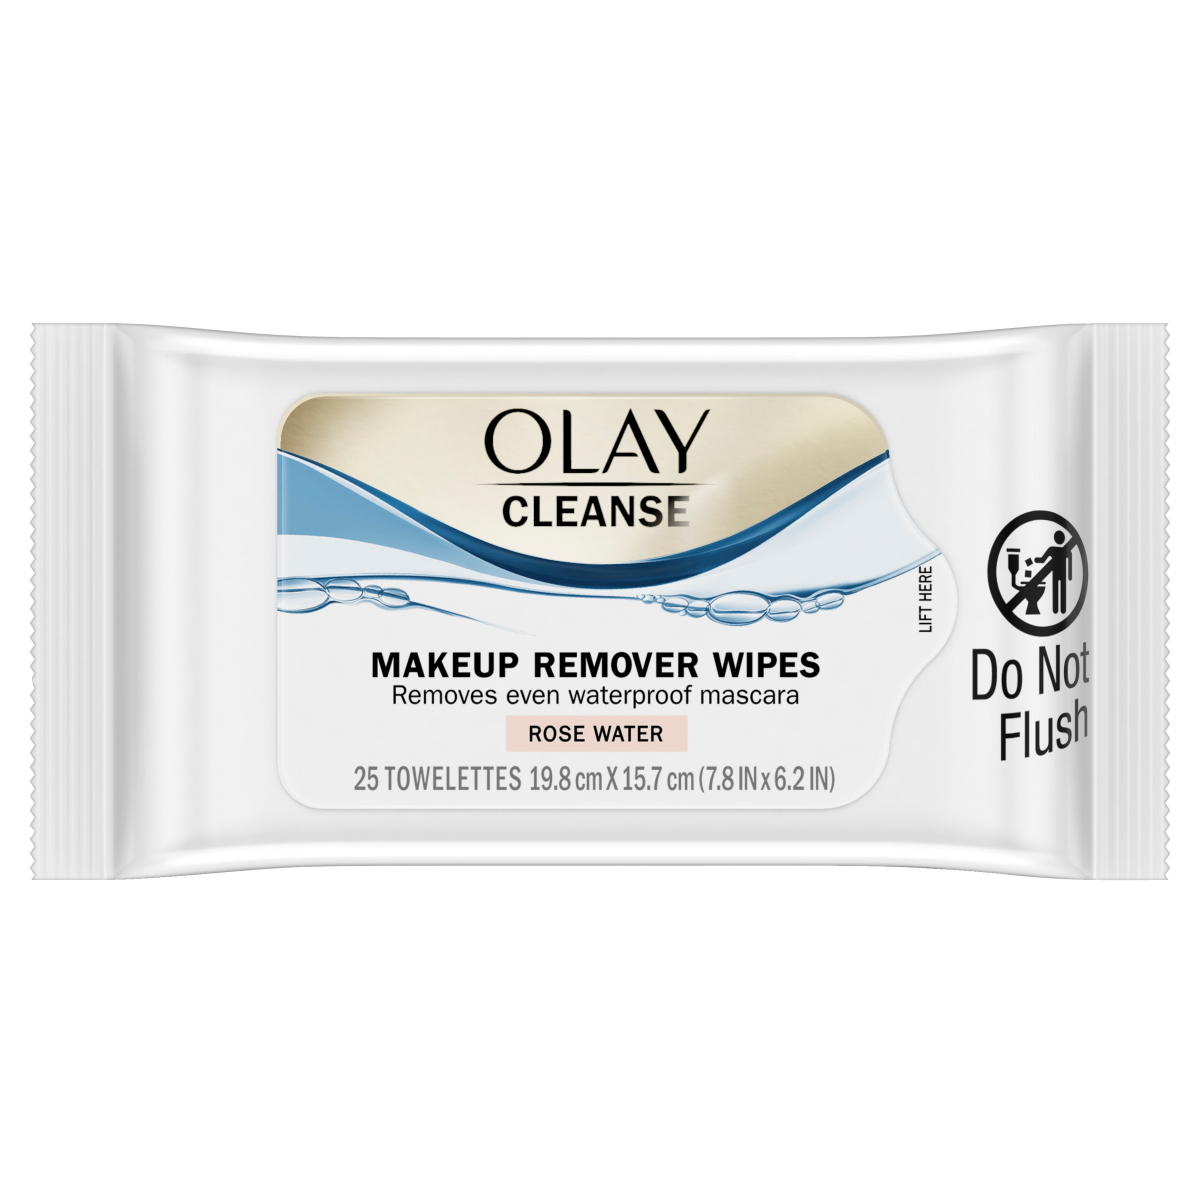 slide 1 of 16, Olay Cleanse Makeup Remover Wipes Rose Water, 25 ct